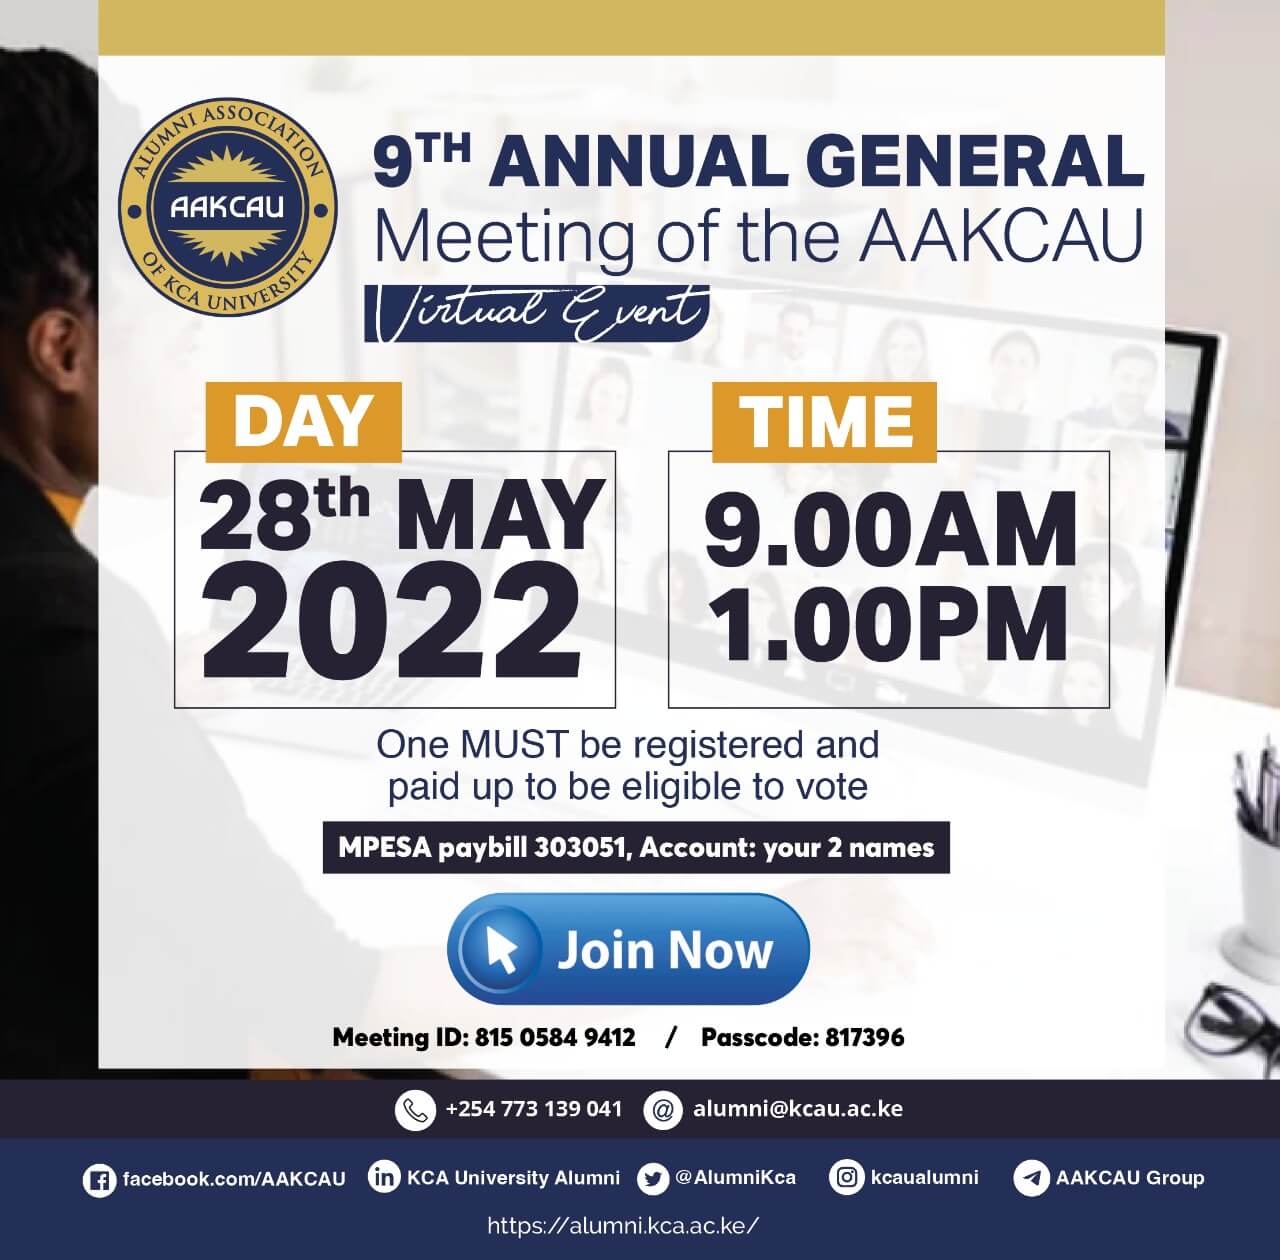 9th Annual General Meeting of the AAKCAU